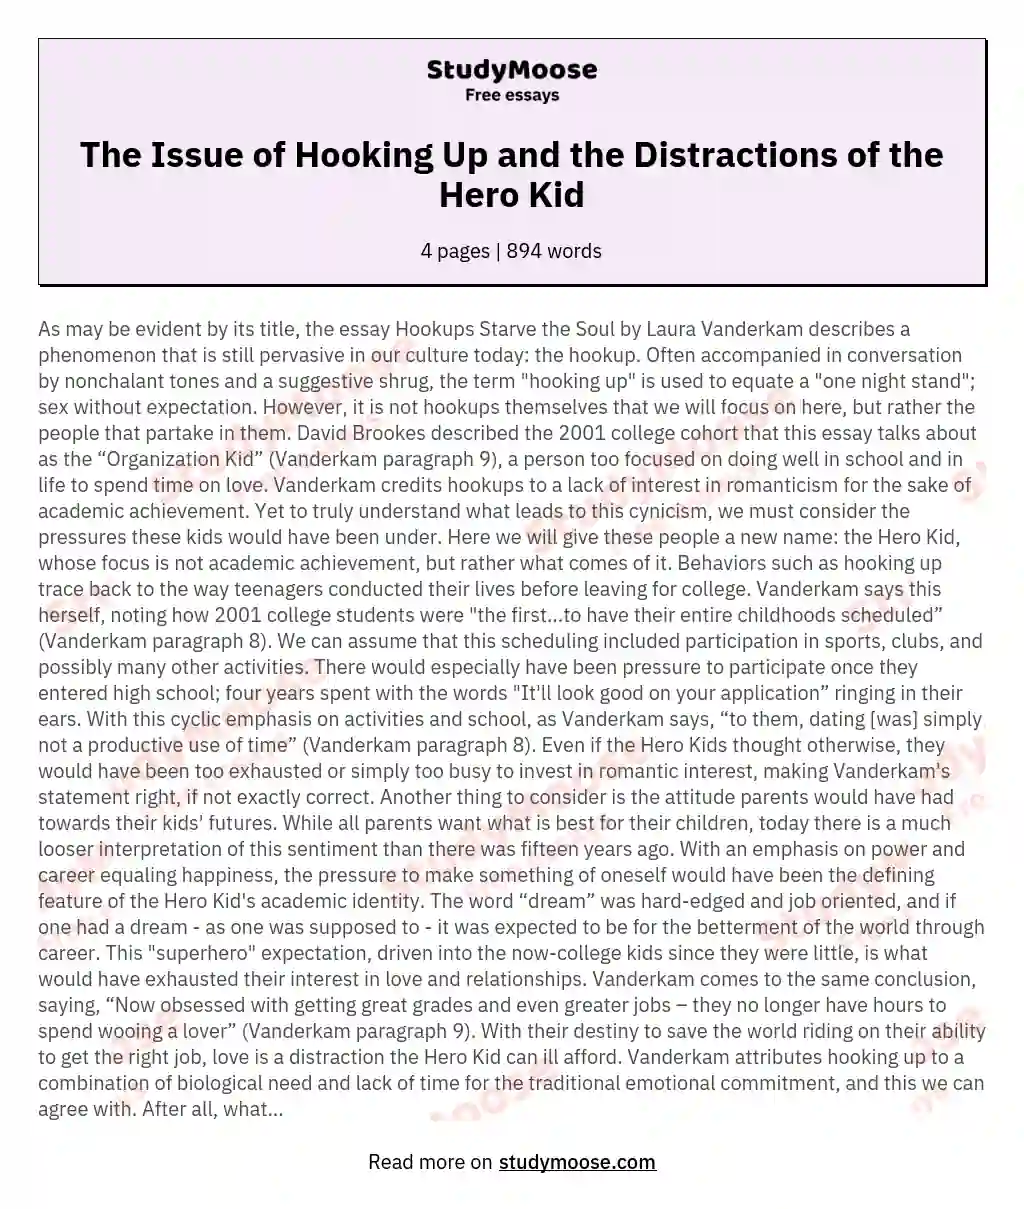 The Issue of Hooking Up and the Distractions of the Hero Kid essay